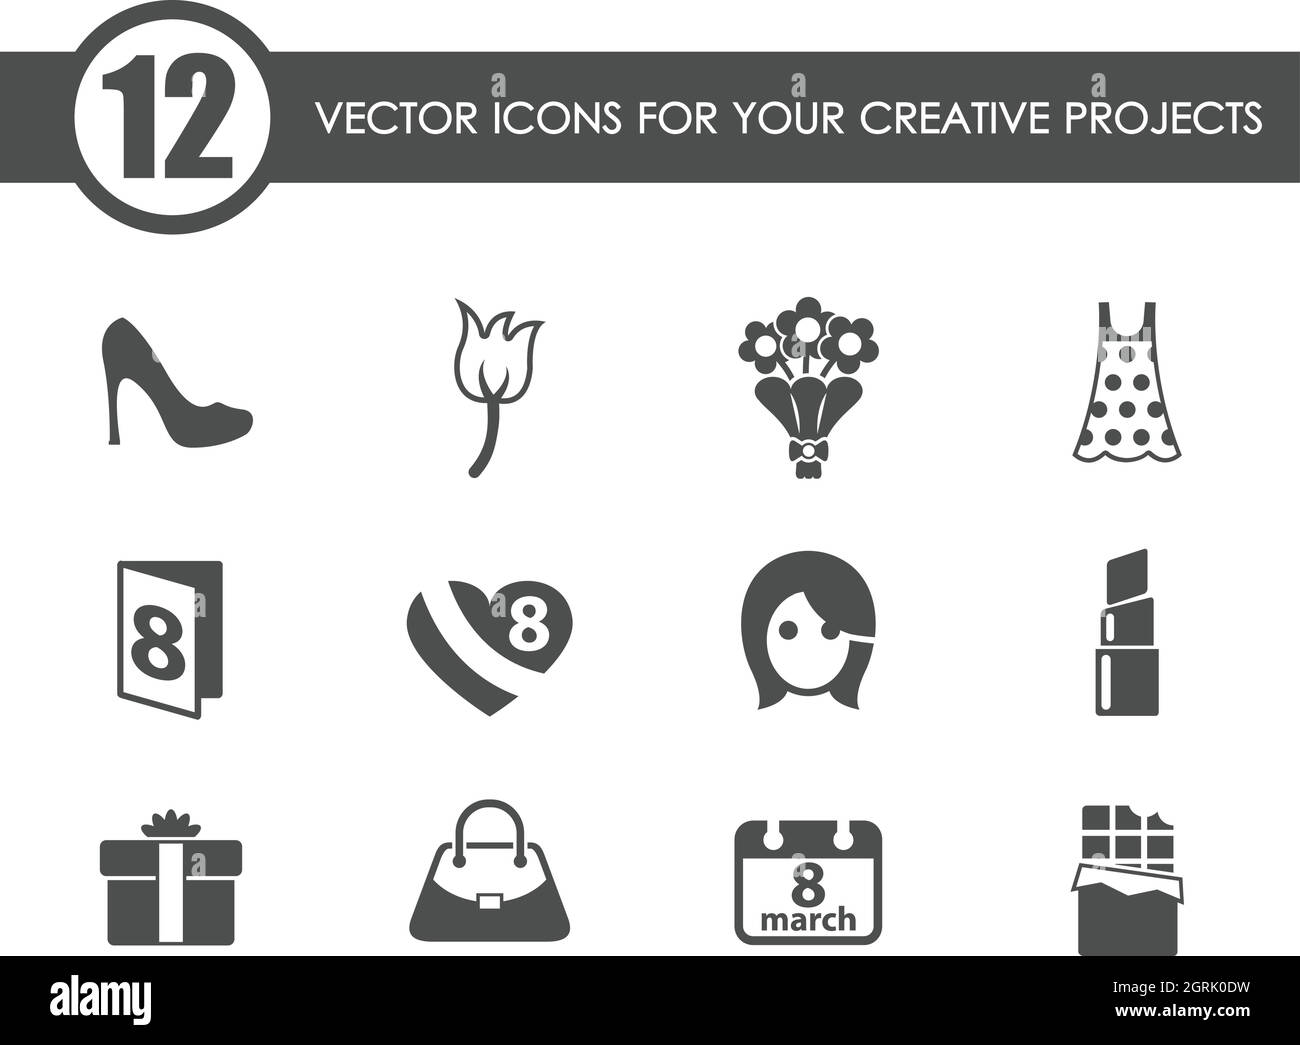 8 march vector icons Stock Vector